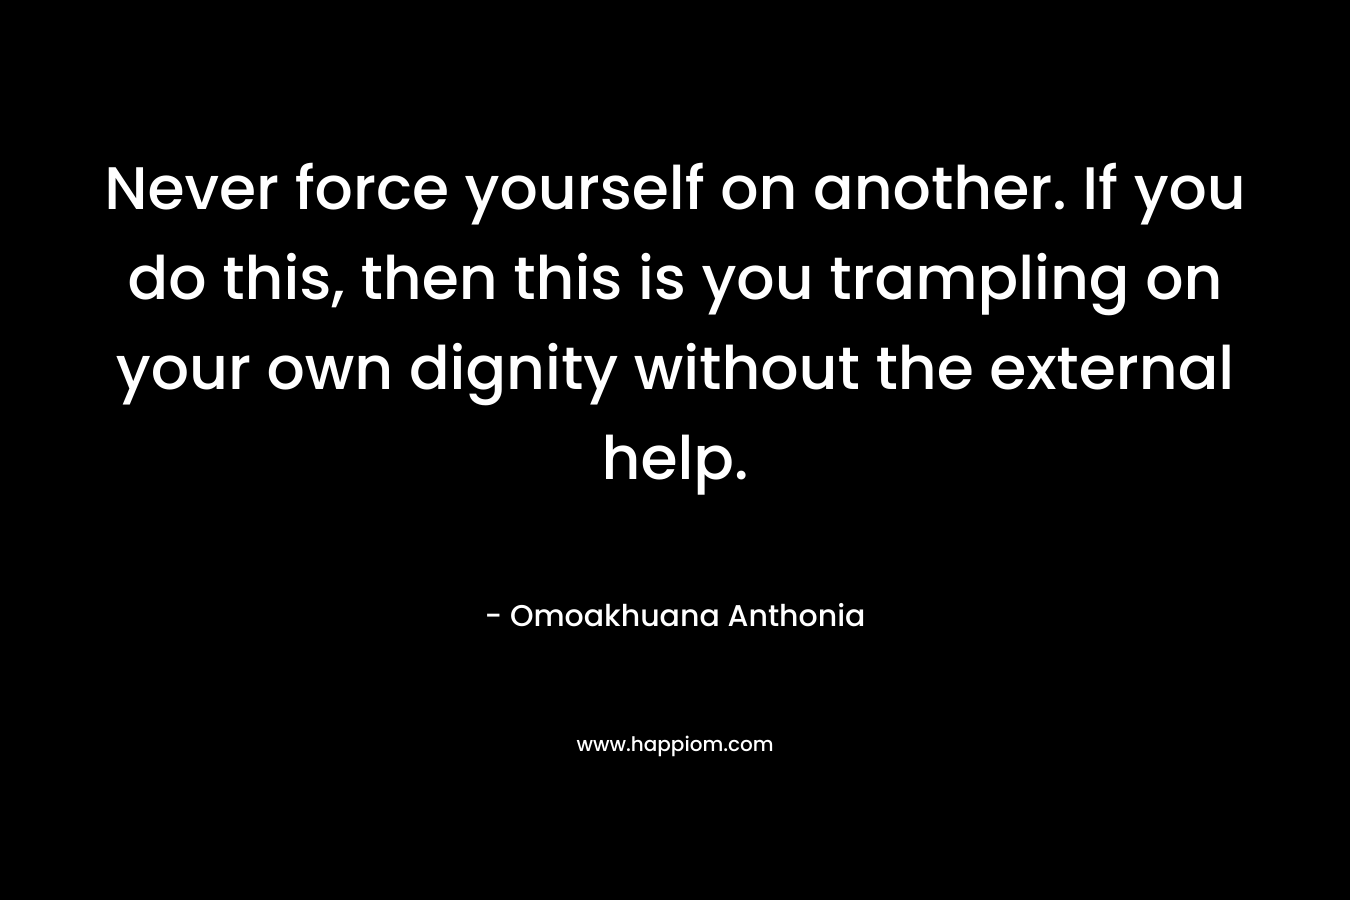 Never force yourself on another. If you do this, then this is you trampling on your own dignity without the external help. – Omoakhuana Anthonia